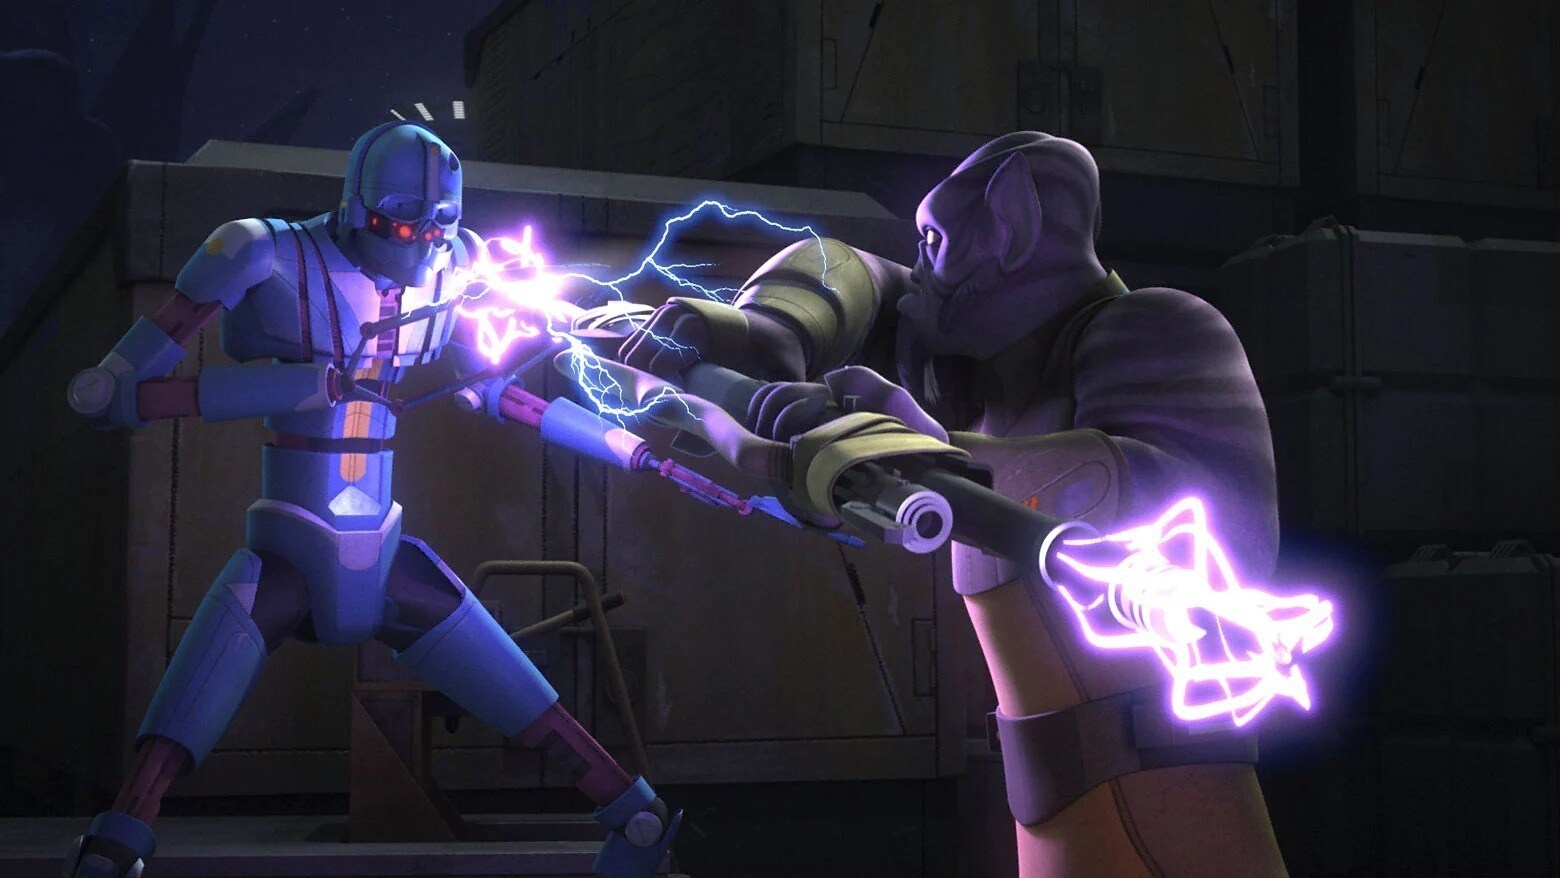 Zeb fighting a mysterious droid at the rebel base